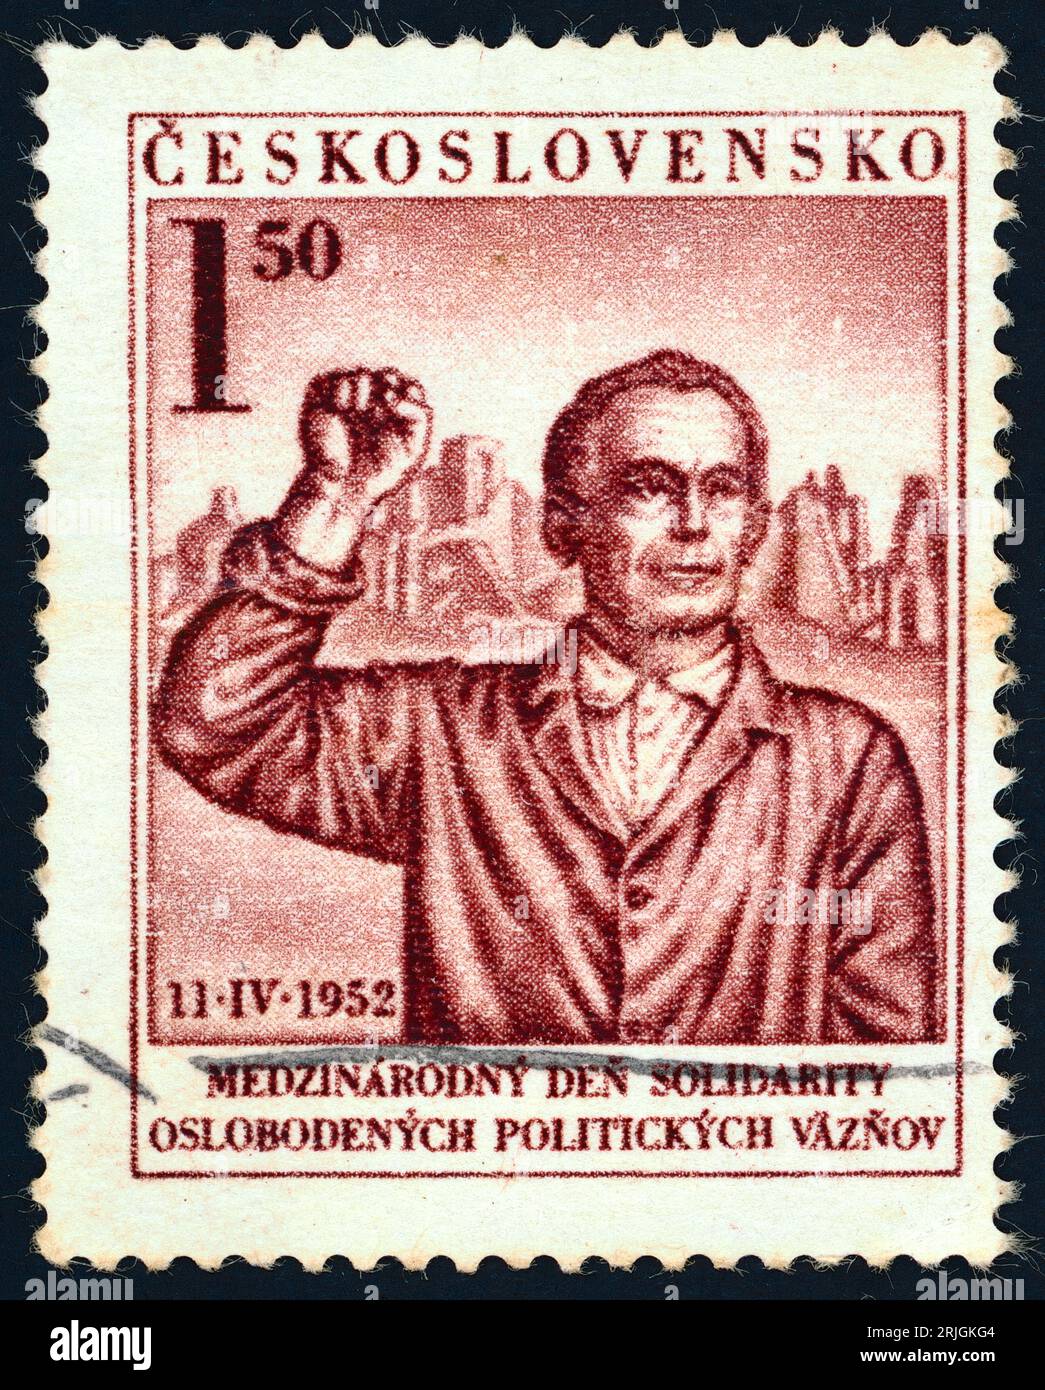 'The International Day of Solidarity of Liberated Political Prisoners', 11 April 1952. Postage stamp issued in Czechoslovakia in 1952. The International Day of Liberation of the Nazi concentration camps is observed annually on 11 April, in commemoration of the liberation of the Buchenwald concentration camp in 1945. Stock Photo